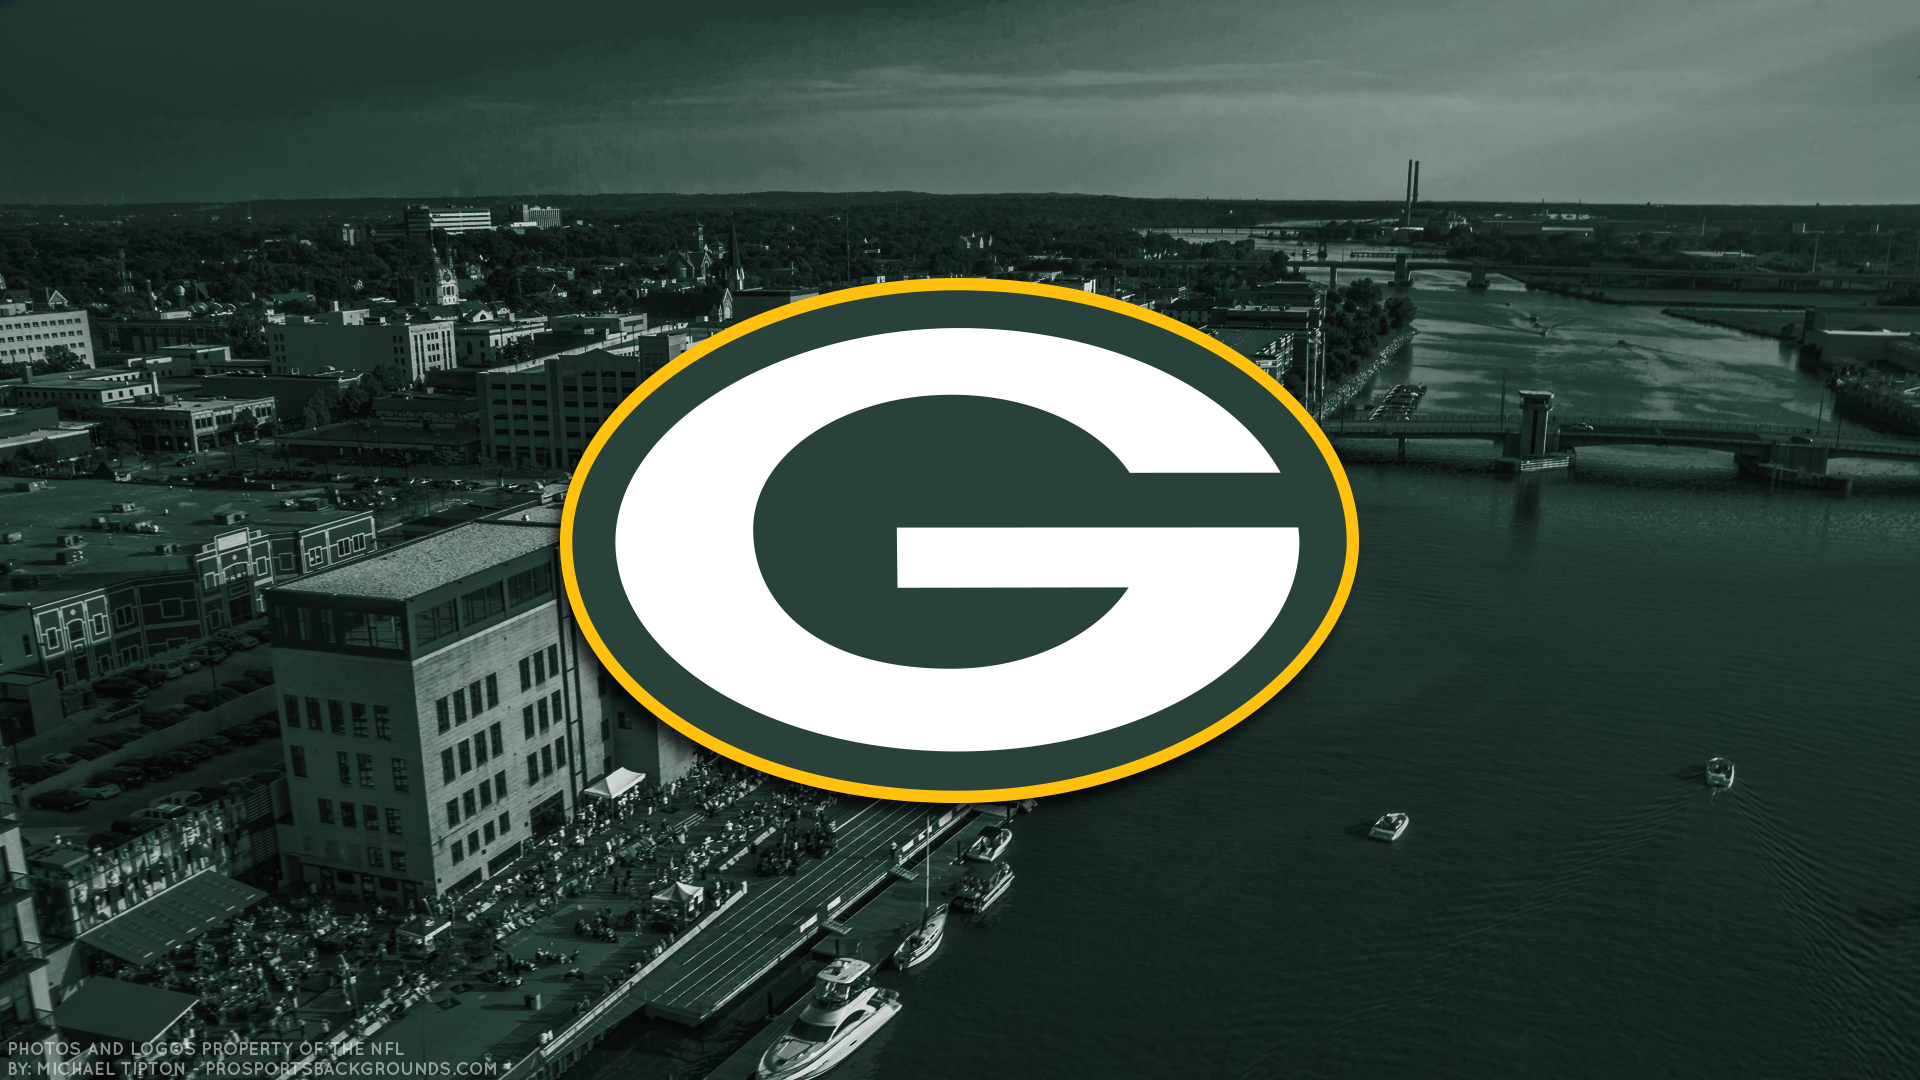 2018 Green Bay Packers Wallpapers - Pc |Iphone| Android - Free Printable Green Bay Packers Logo